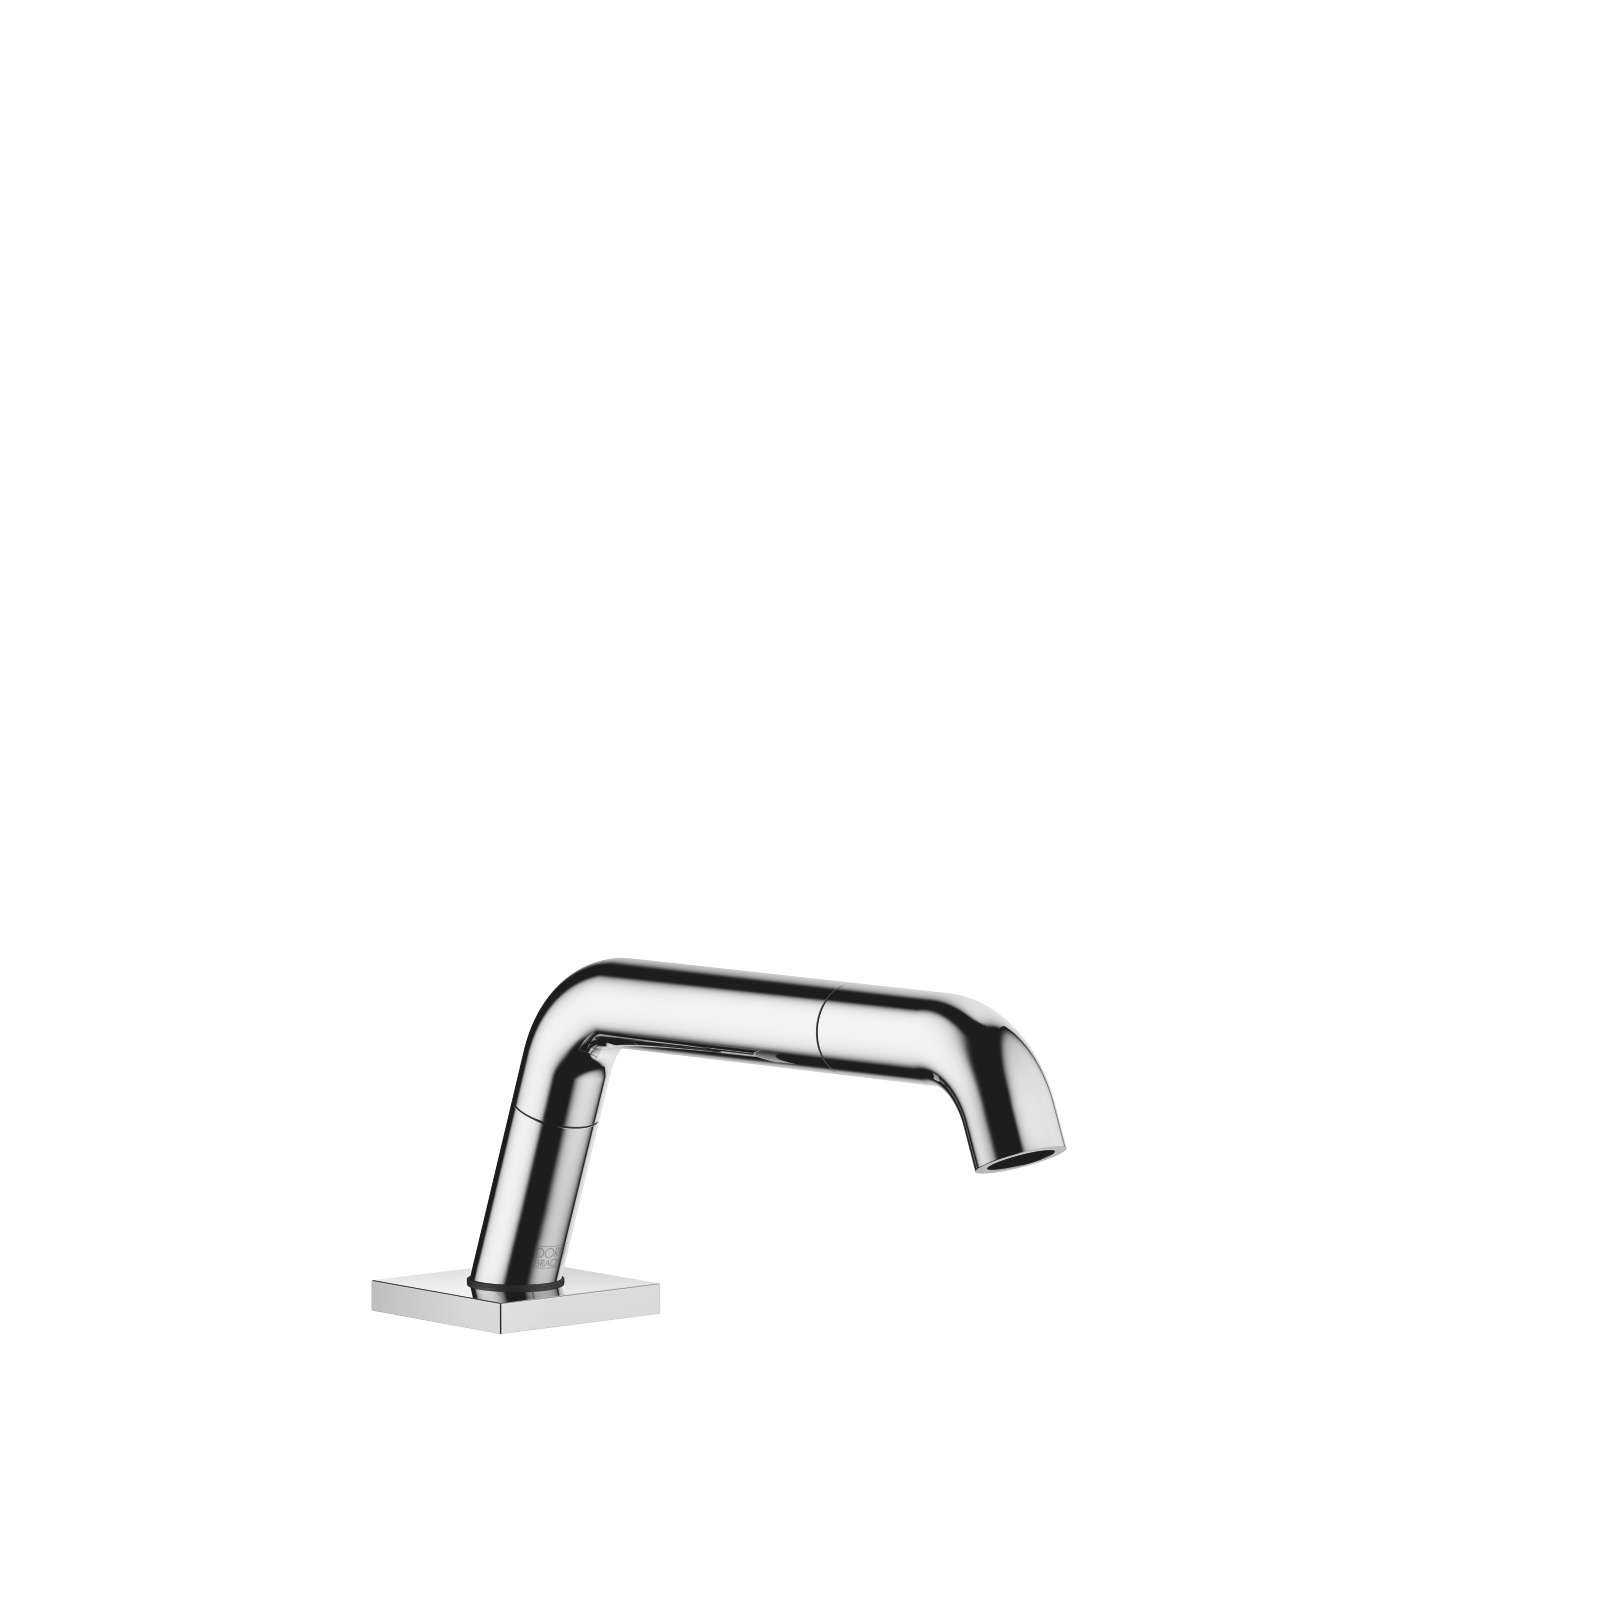 nicotine Voorstad Voorzien SERIES SPECIFIC Chrome Washstand faucets: Affusion pipe